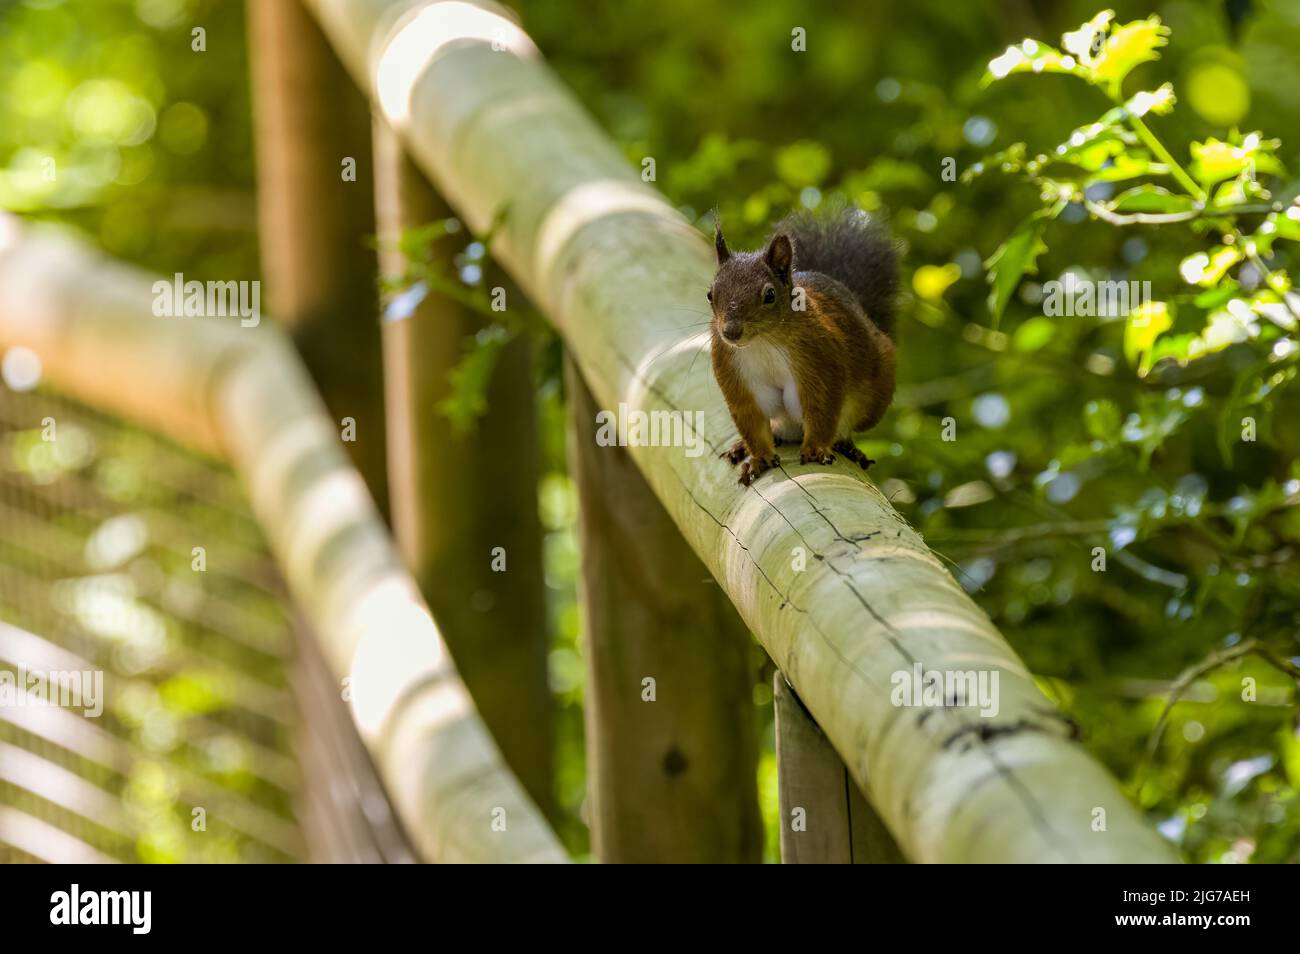 A red squirrel, Sciurus vulgaris sitting on a wooden fence in summer, UK. Stock Photo